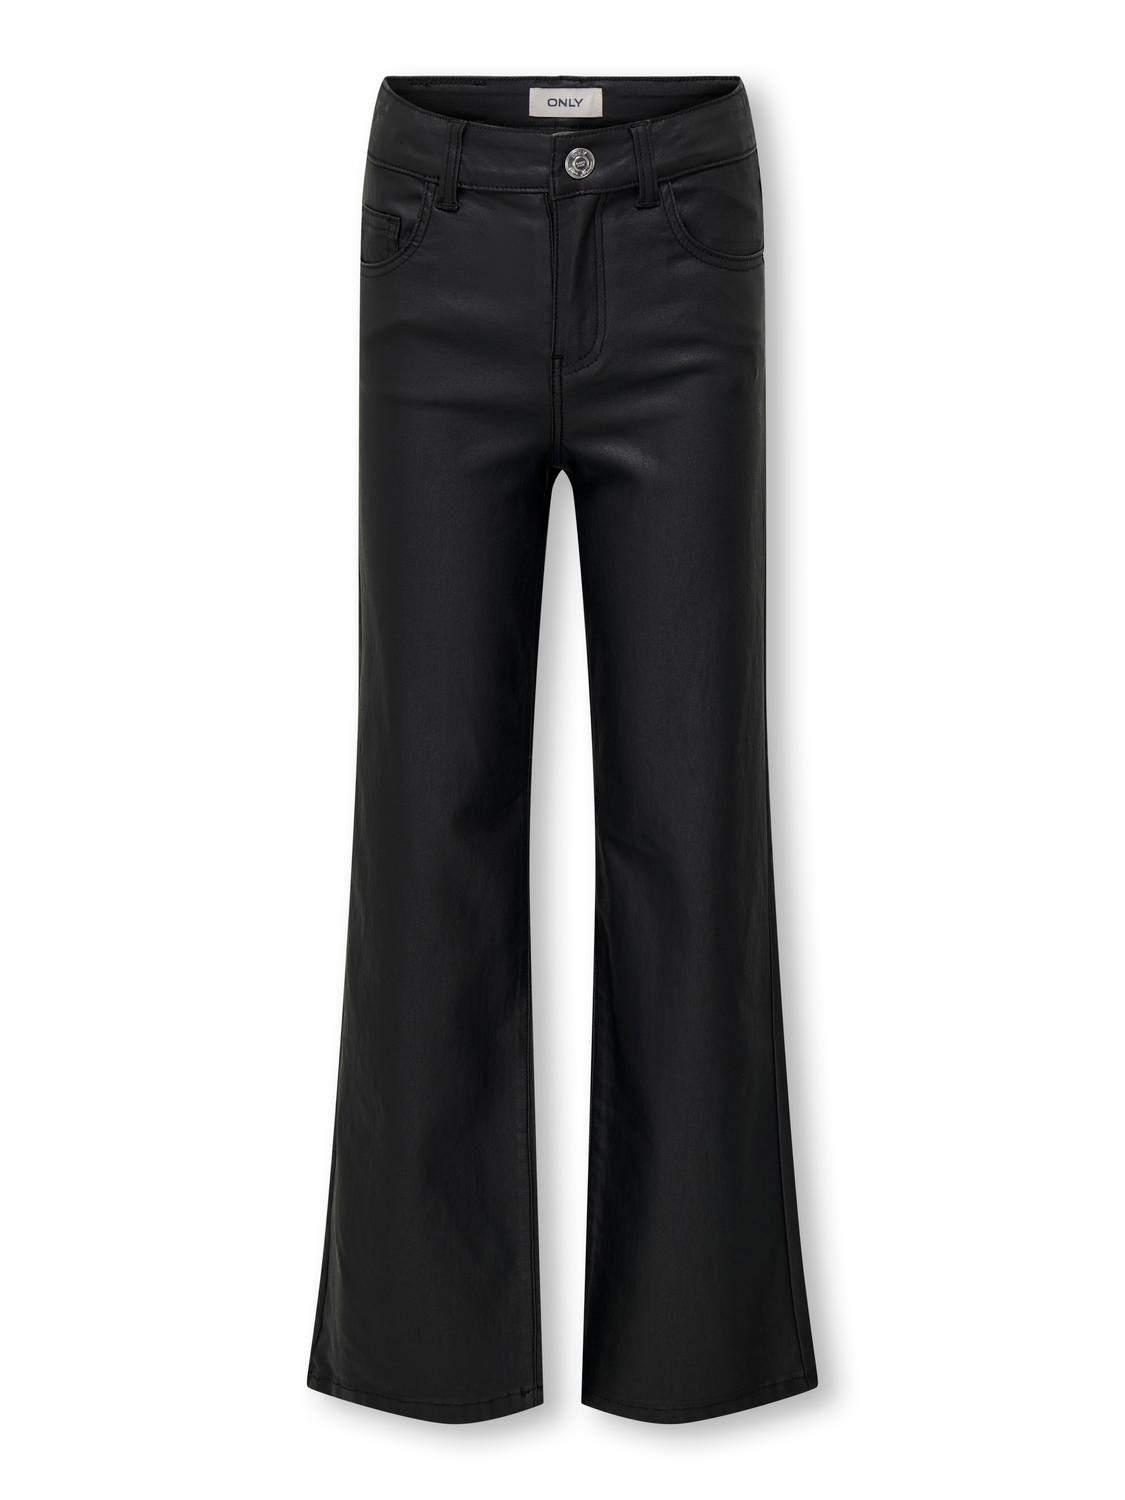 ONLY Wide Leg Fit Trousers -Black - 15302765